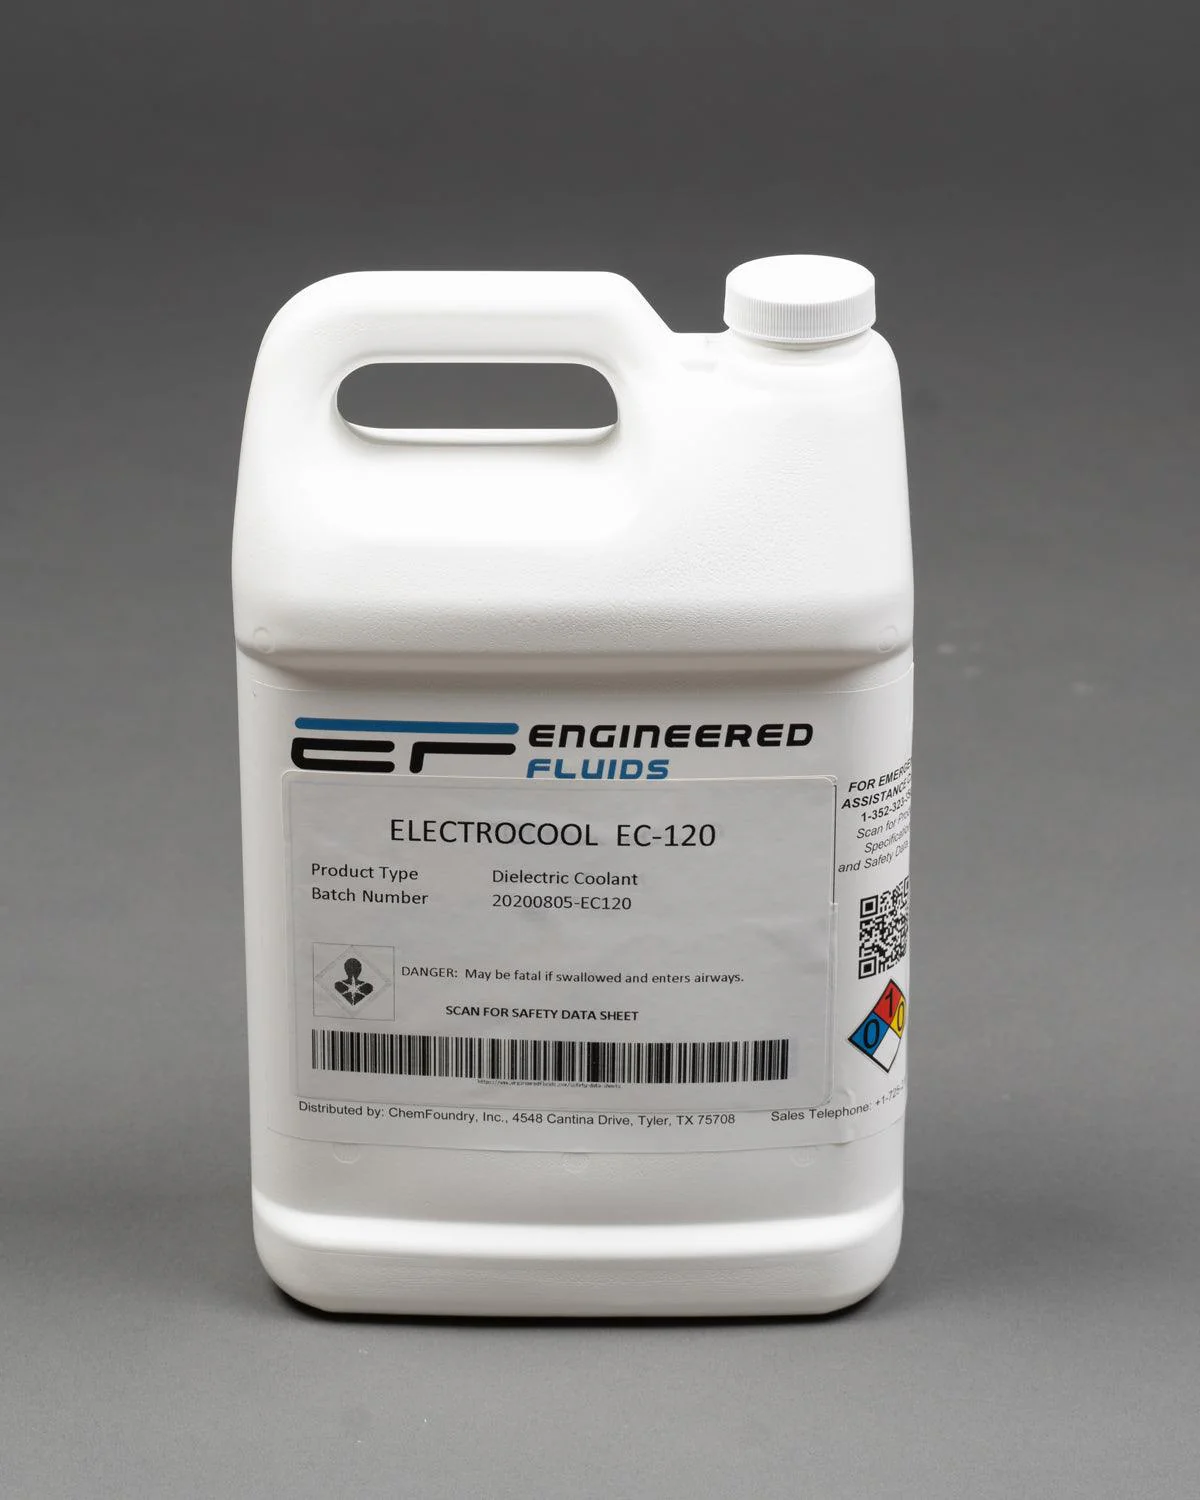 Can you provide more information on the chemical composition of your EC-120 product? Is it a PFC?